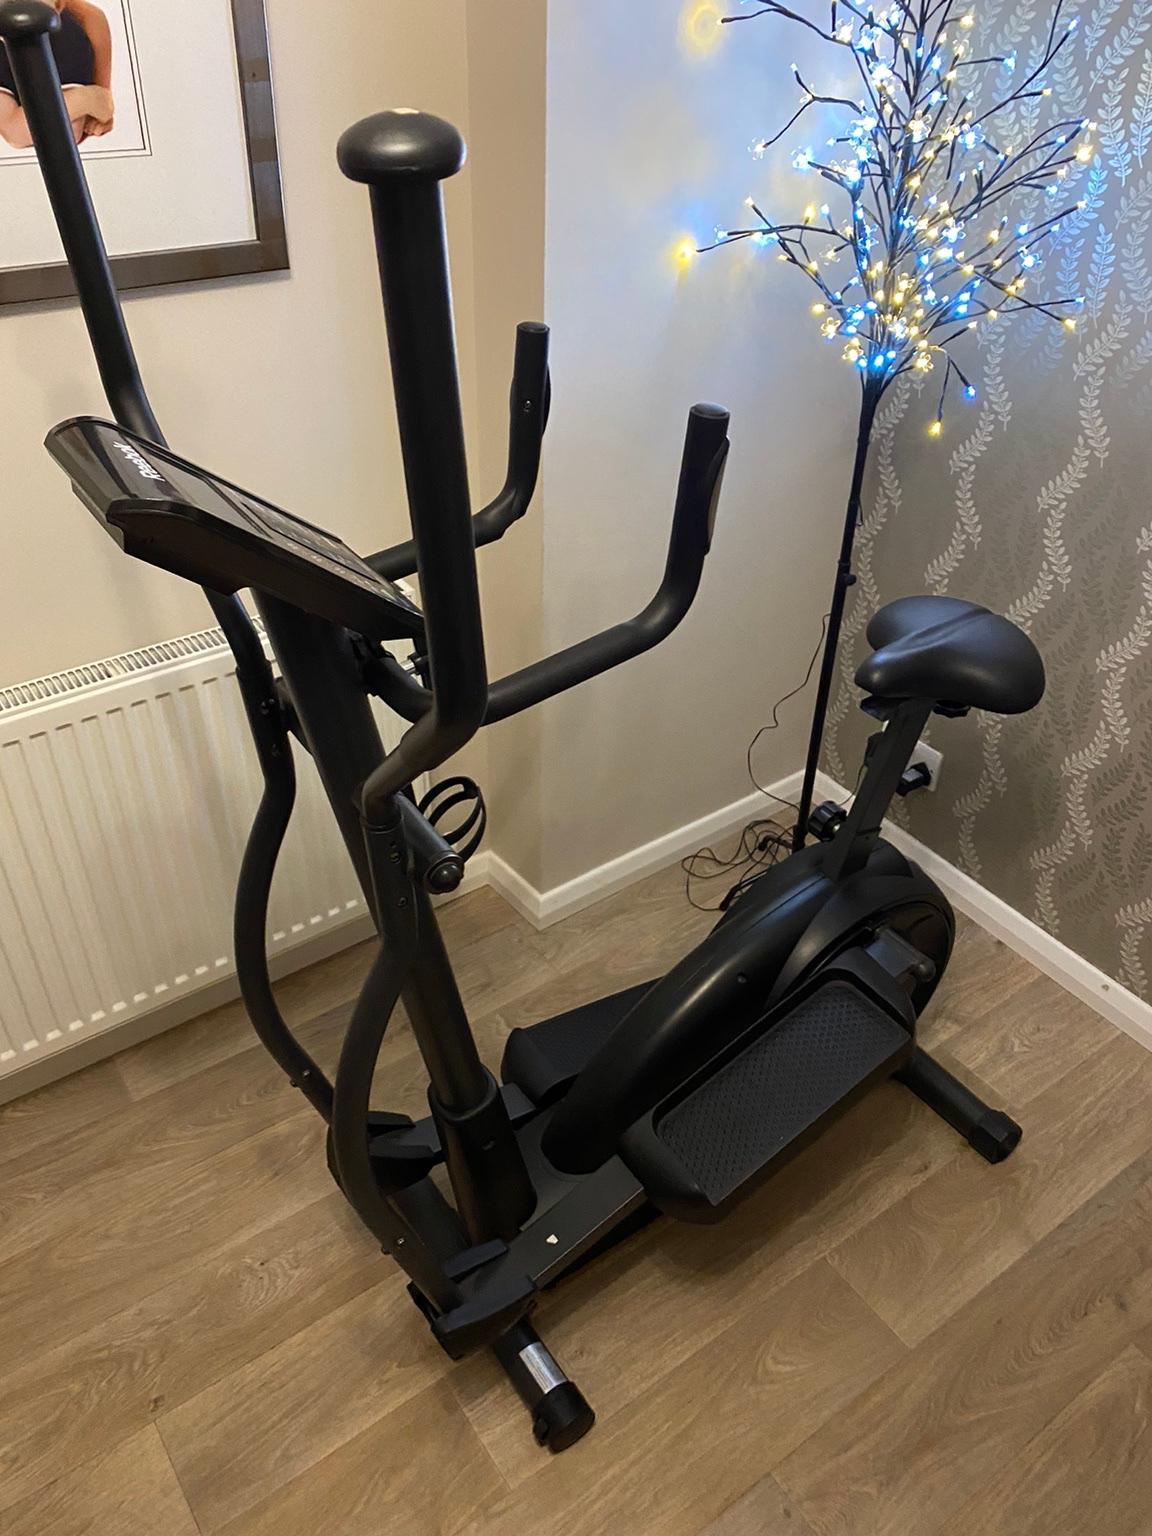 tavle undersøgelse dissipation Reebok Edge Cross Trainer 2 in 1 Cycle FAB!!! in GU46 Wokingham Without for  £150.00 for sale | Shpock